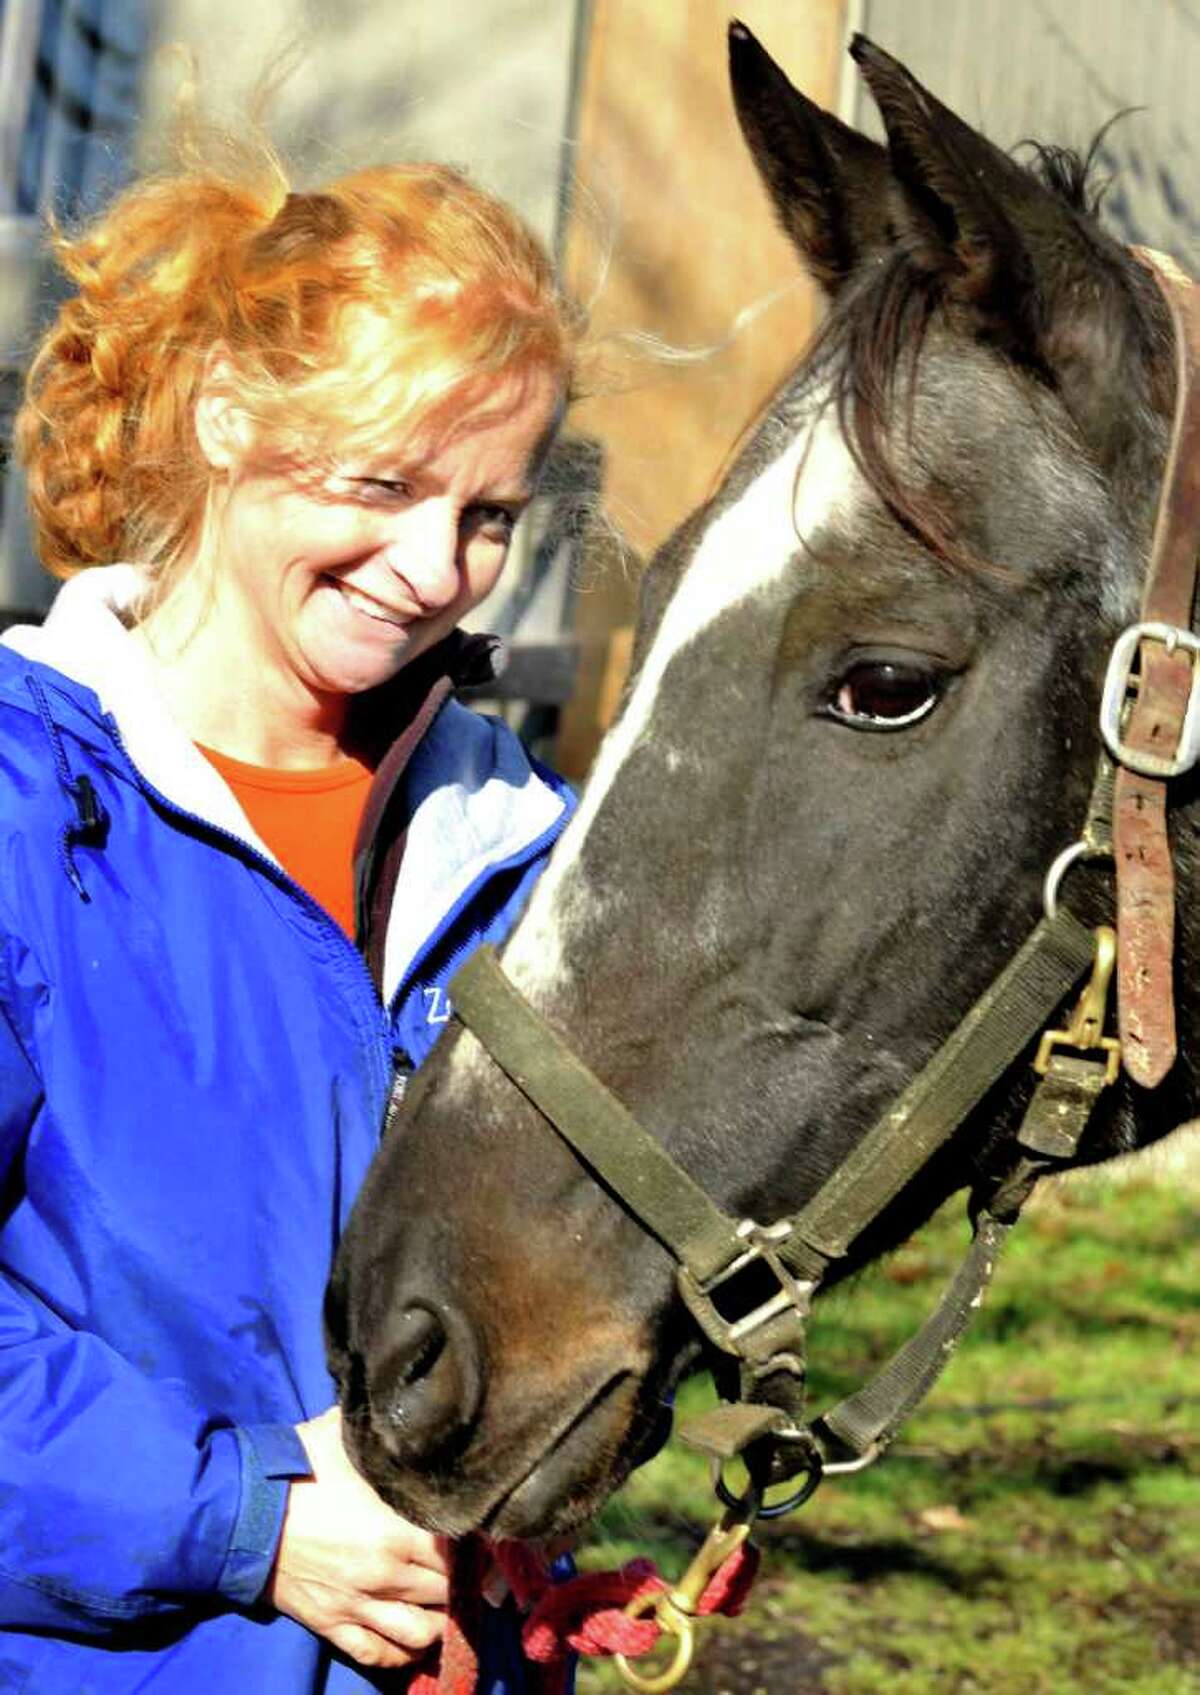 Annette Sullivan stands with Burma's Lady, the horse she rescued from slaughter, at her Zoar Ridge Stables in Newtown Thursday, Dec. 8, 2011.